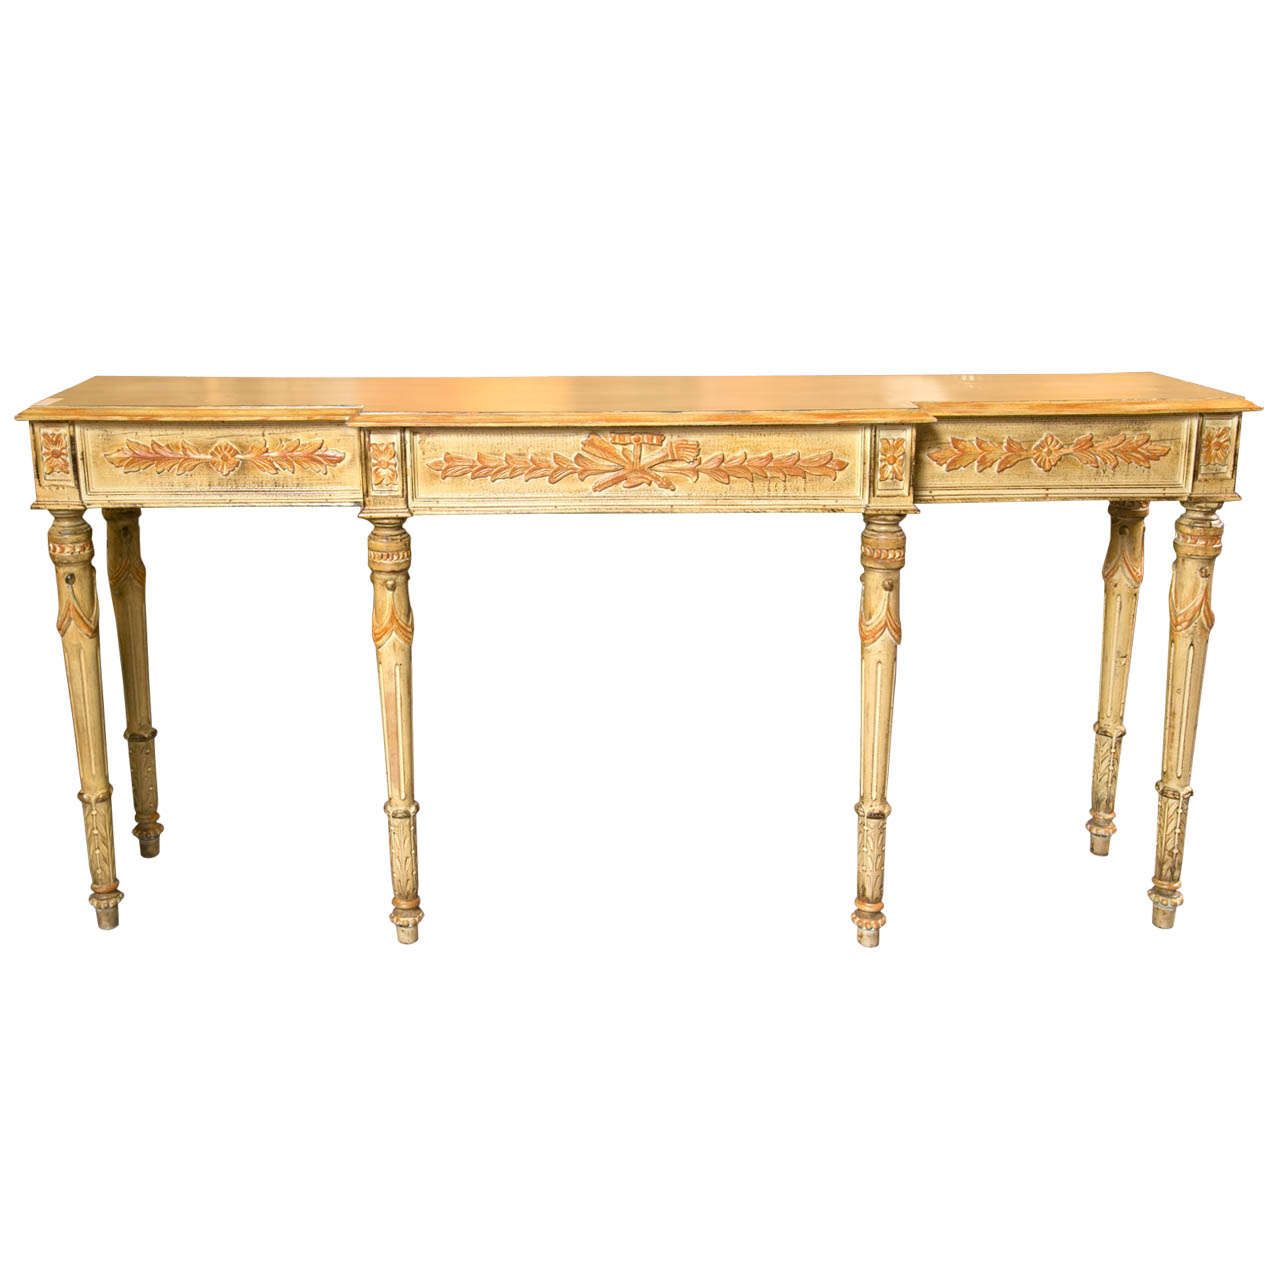 French Louis XVI Style Painted Console Table by Jansen